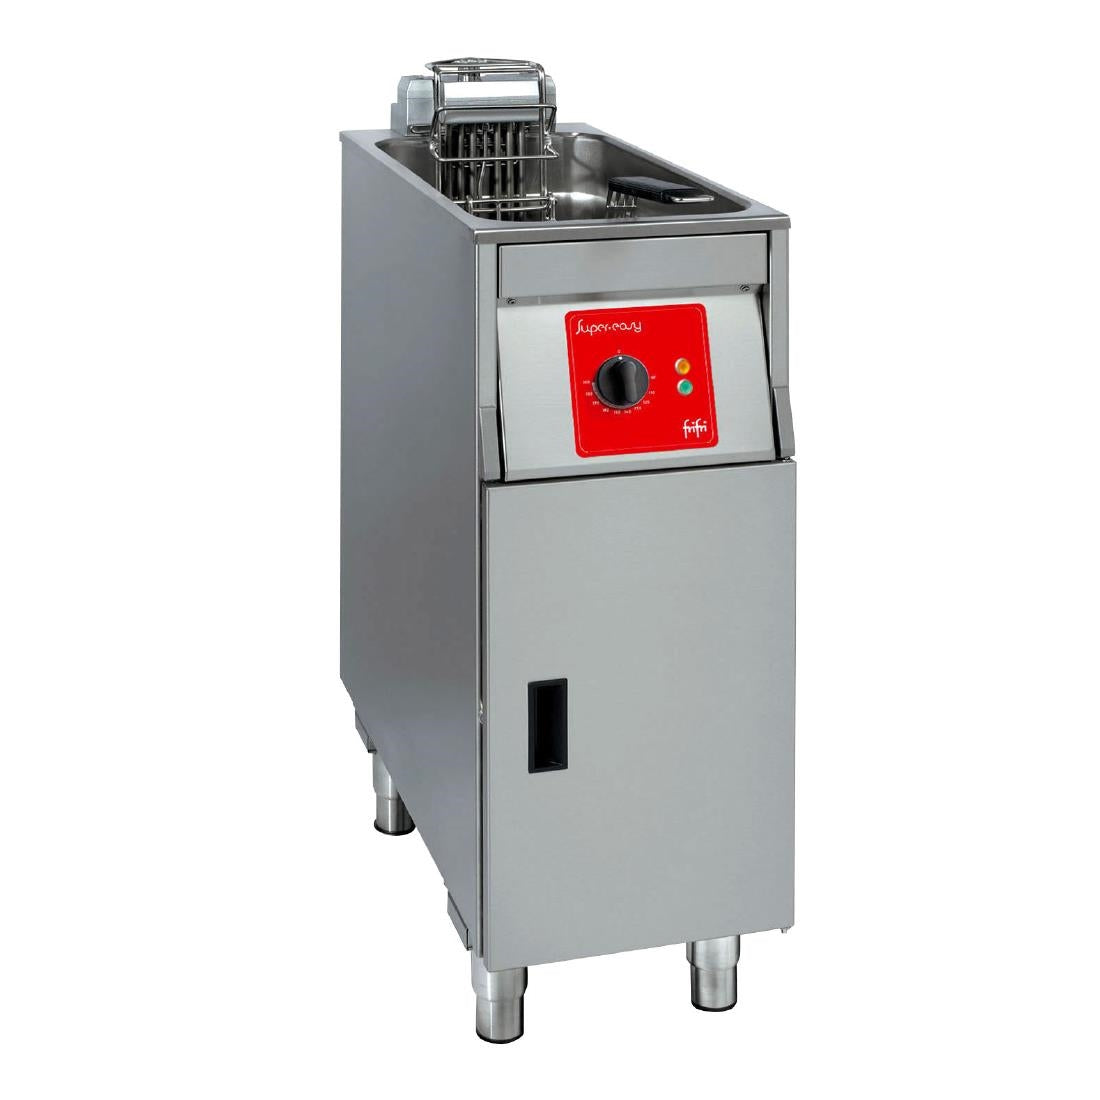 HS053-3PH FriFri Super Easy 311 Electric Free-standing Fryer Single Tank Single Basket without Filtration 11.4kW Three Phase